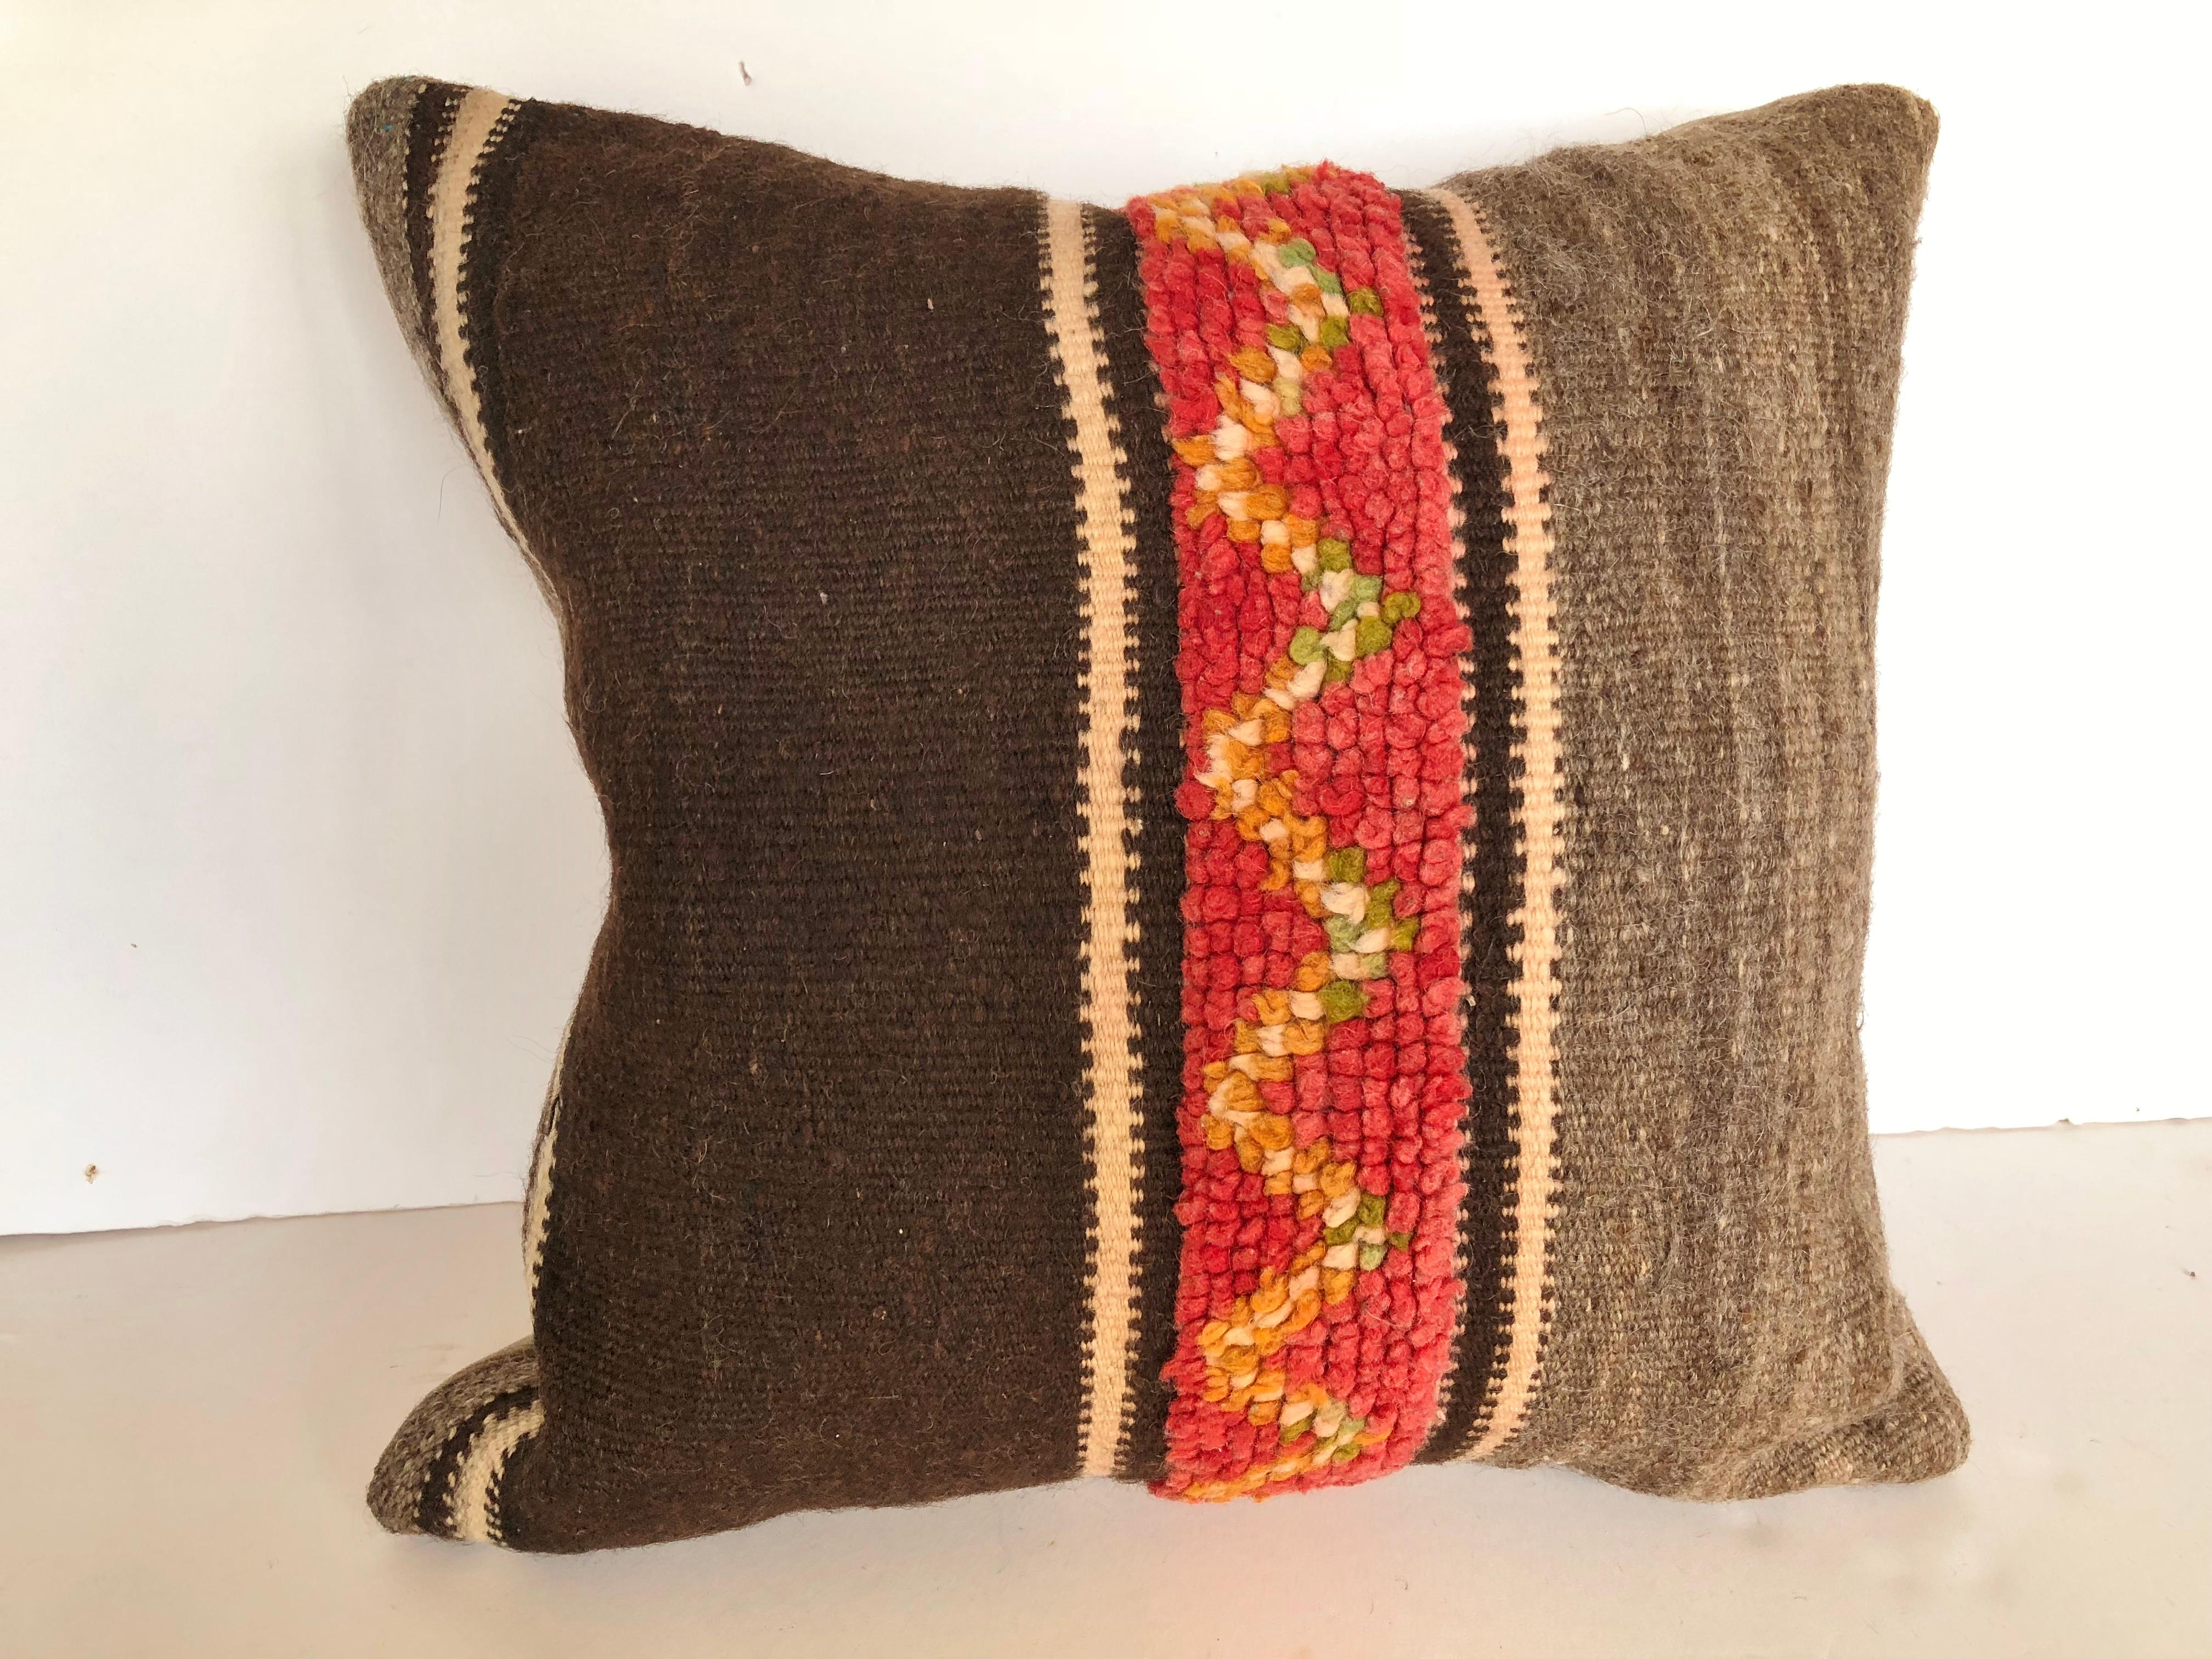 Custom Pillows by Maison Suzanne cut from a vintage hand loomed wool Moroccan Berber rug from the Atlas Mountains.  Wool with stripes in natural colors is embellished with colorful tufted bands.  Pillows are backed in velvet, filled with inserts of